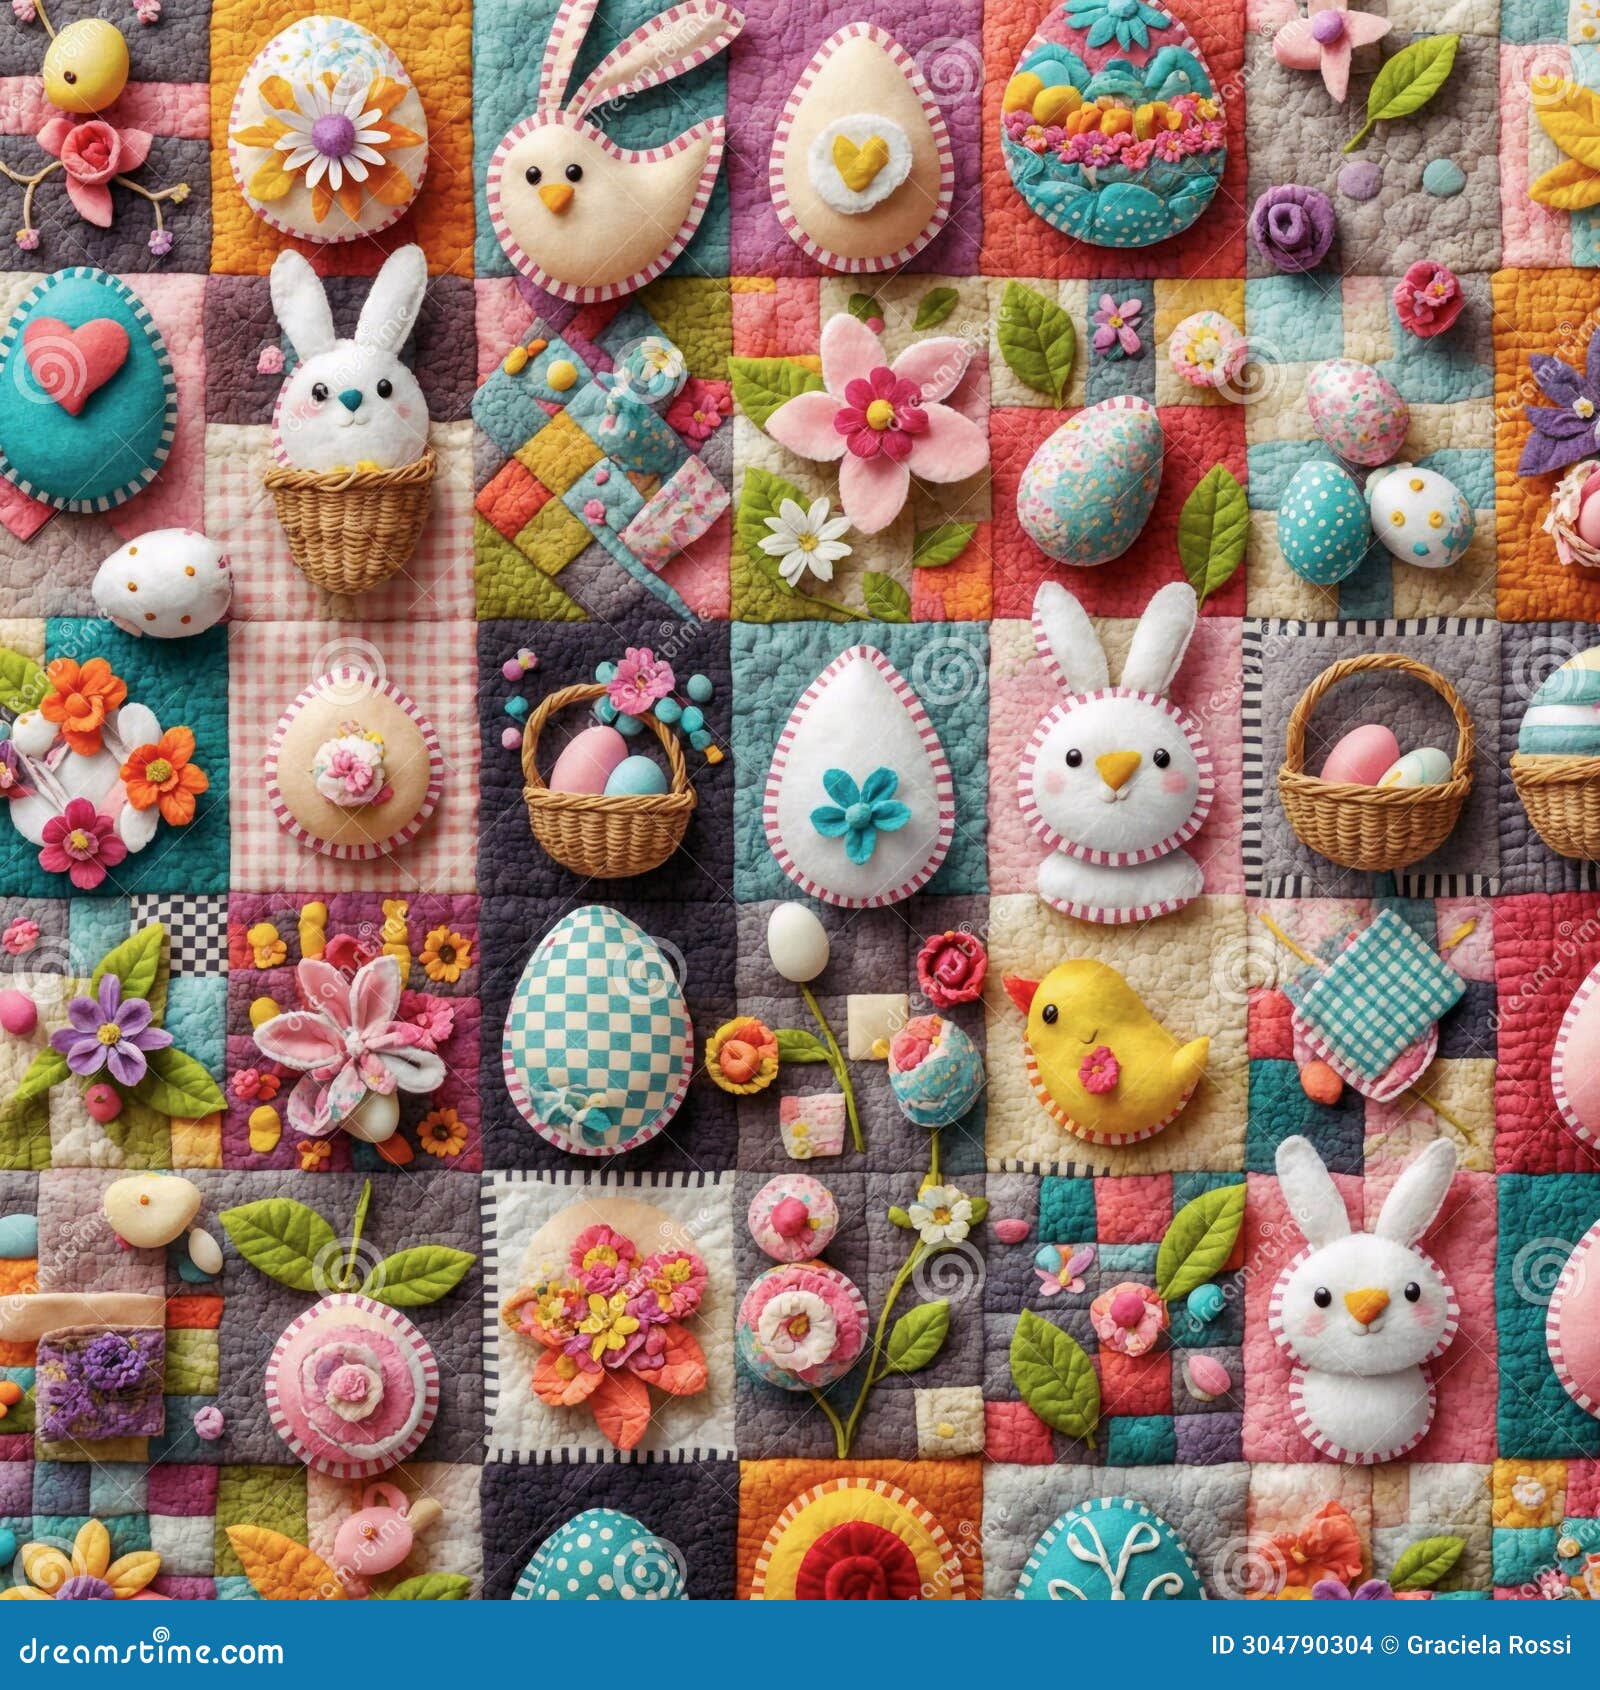 easter decoration with colorful eggs and bunnies on white background, fieltro